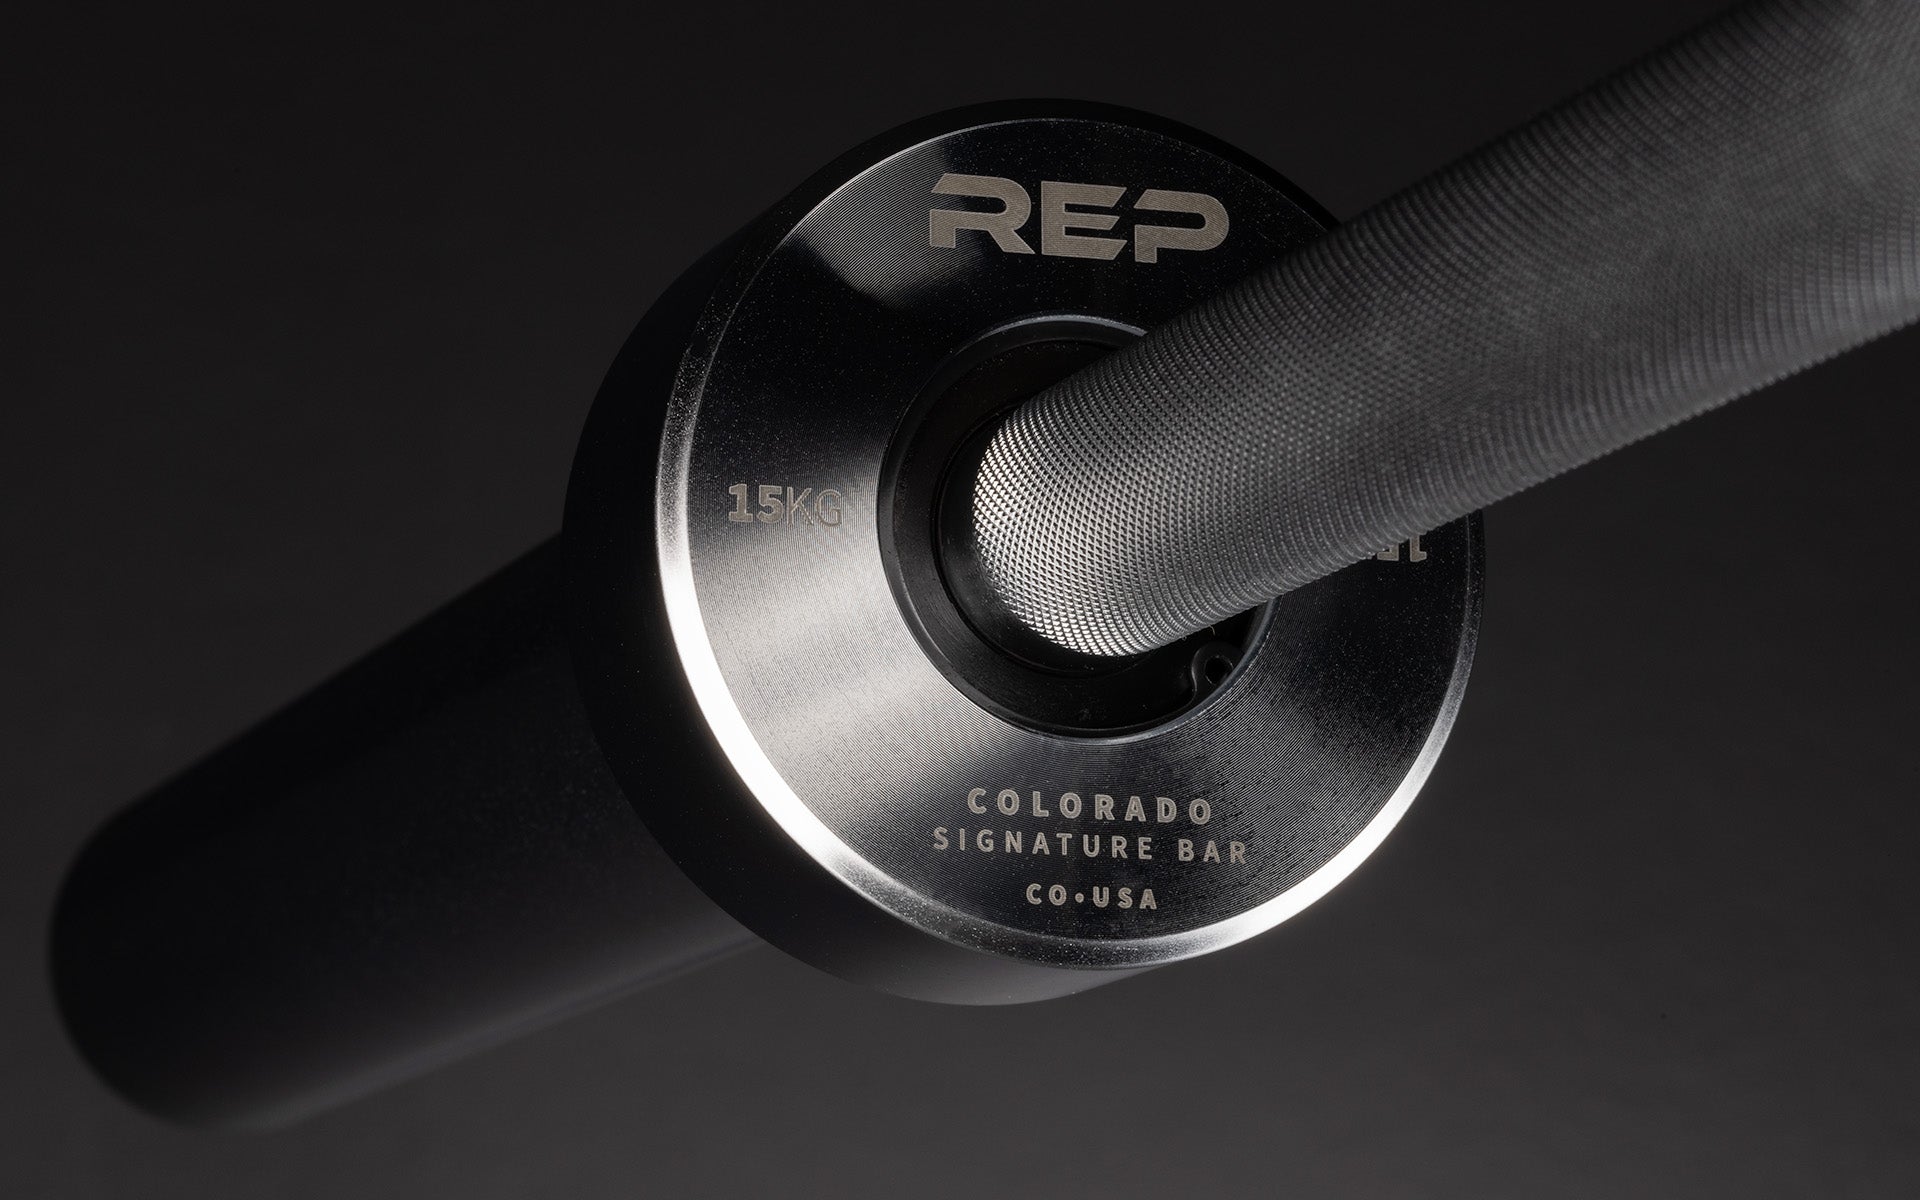 Close-up view of the laser-etched labeling on the inside of the sleeve of a REP 15kg Colorado Bar.